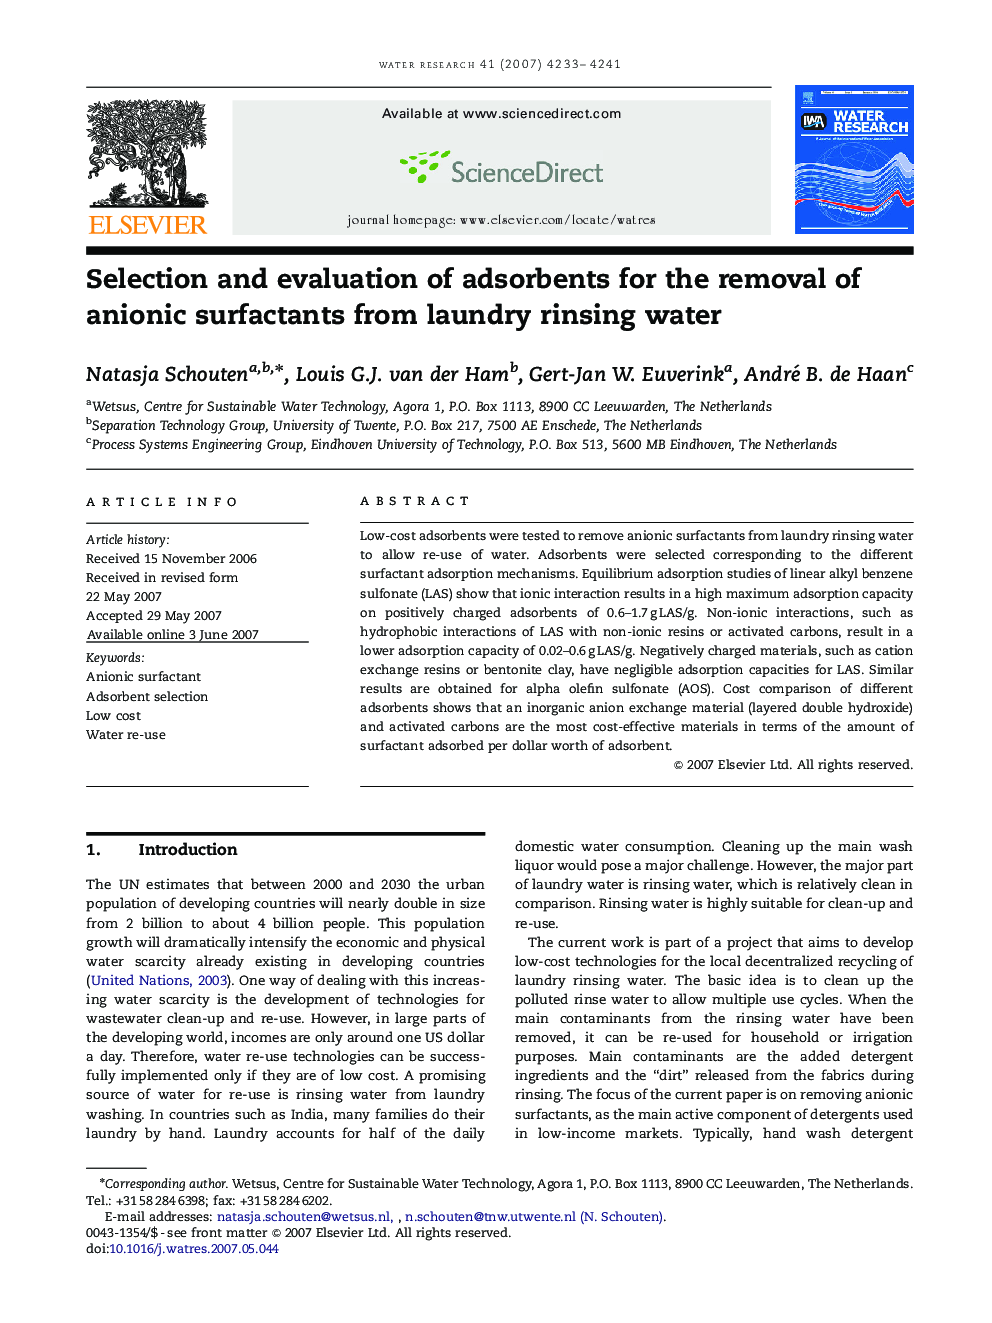 Selection and evaluation of adsorbents for the removal of anionic surfactants from laundry rinsing water